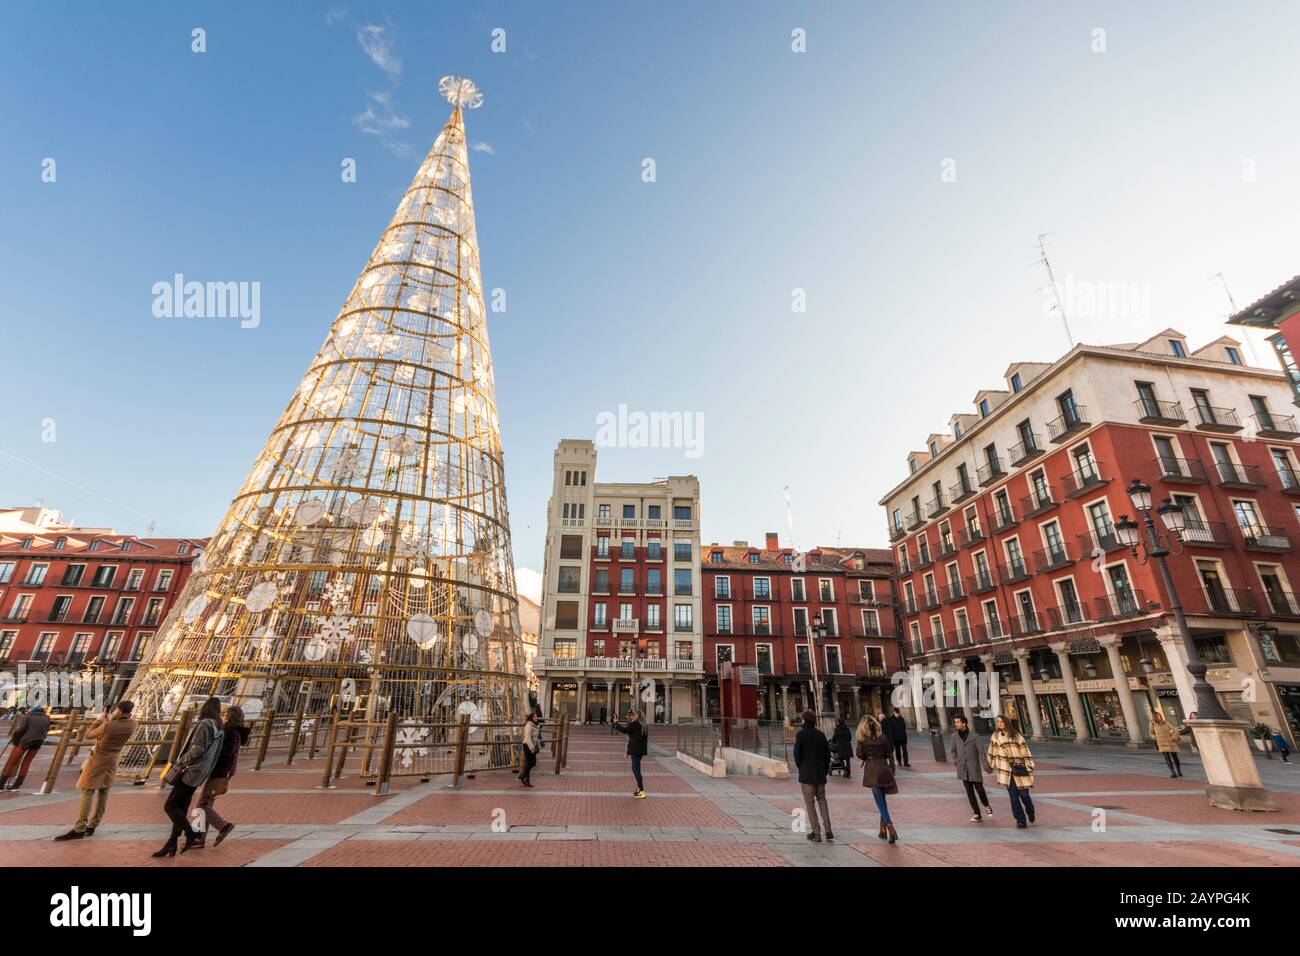 Valladolid, Spain. The Porticoes of the Plaza Mayor (Grand Market Square), first of its kind in Spain Stock Photo